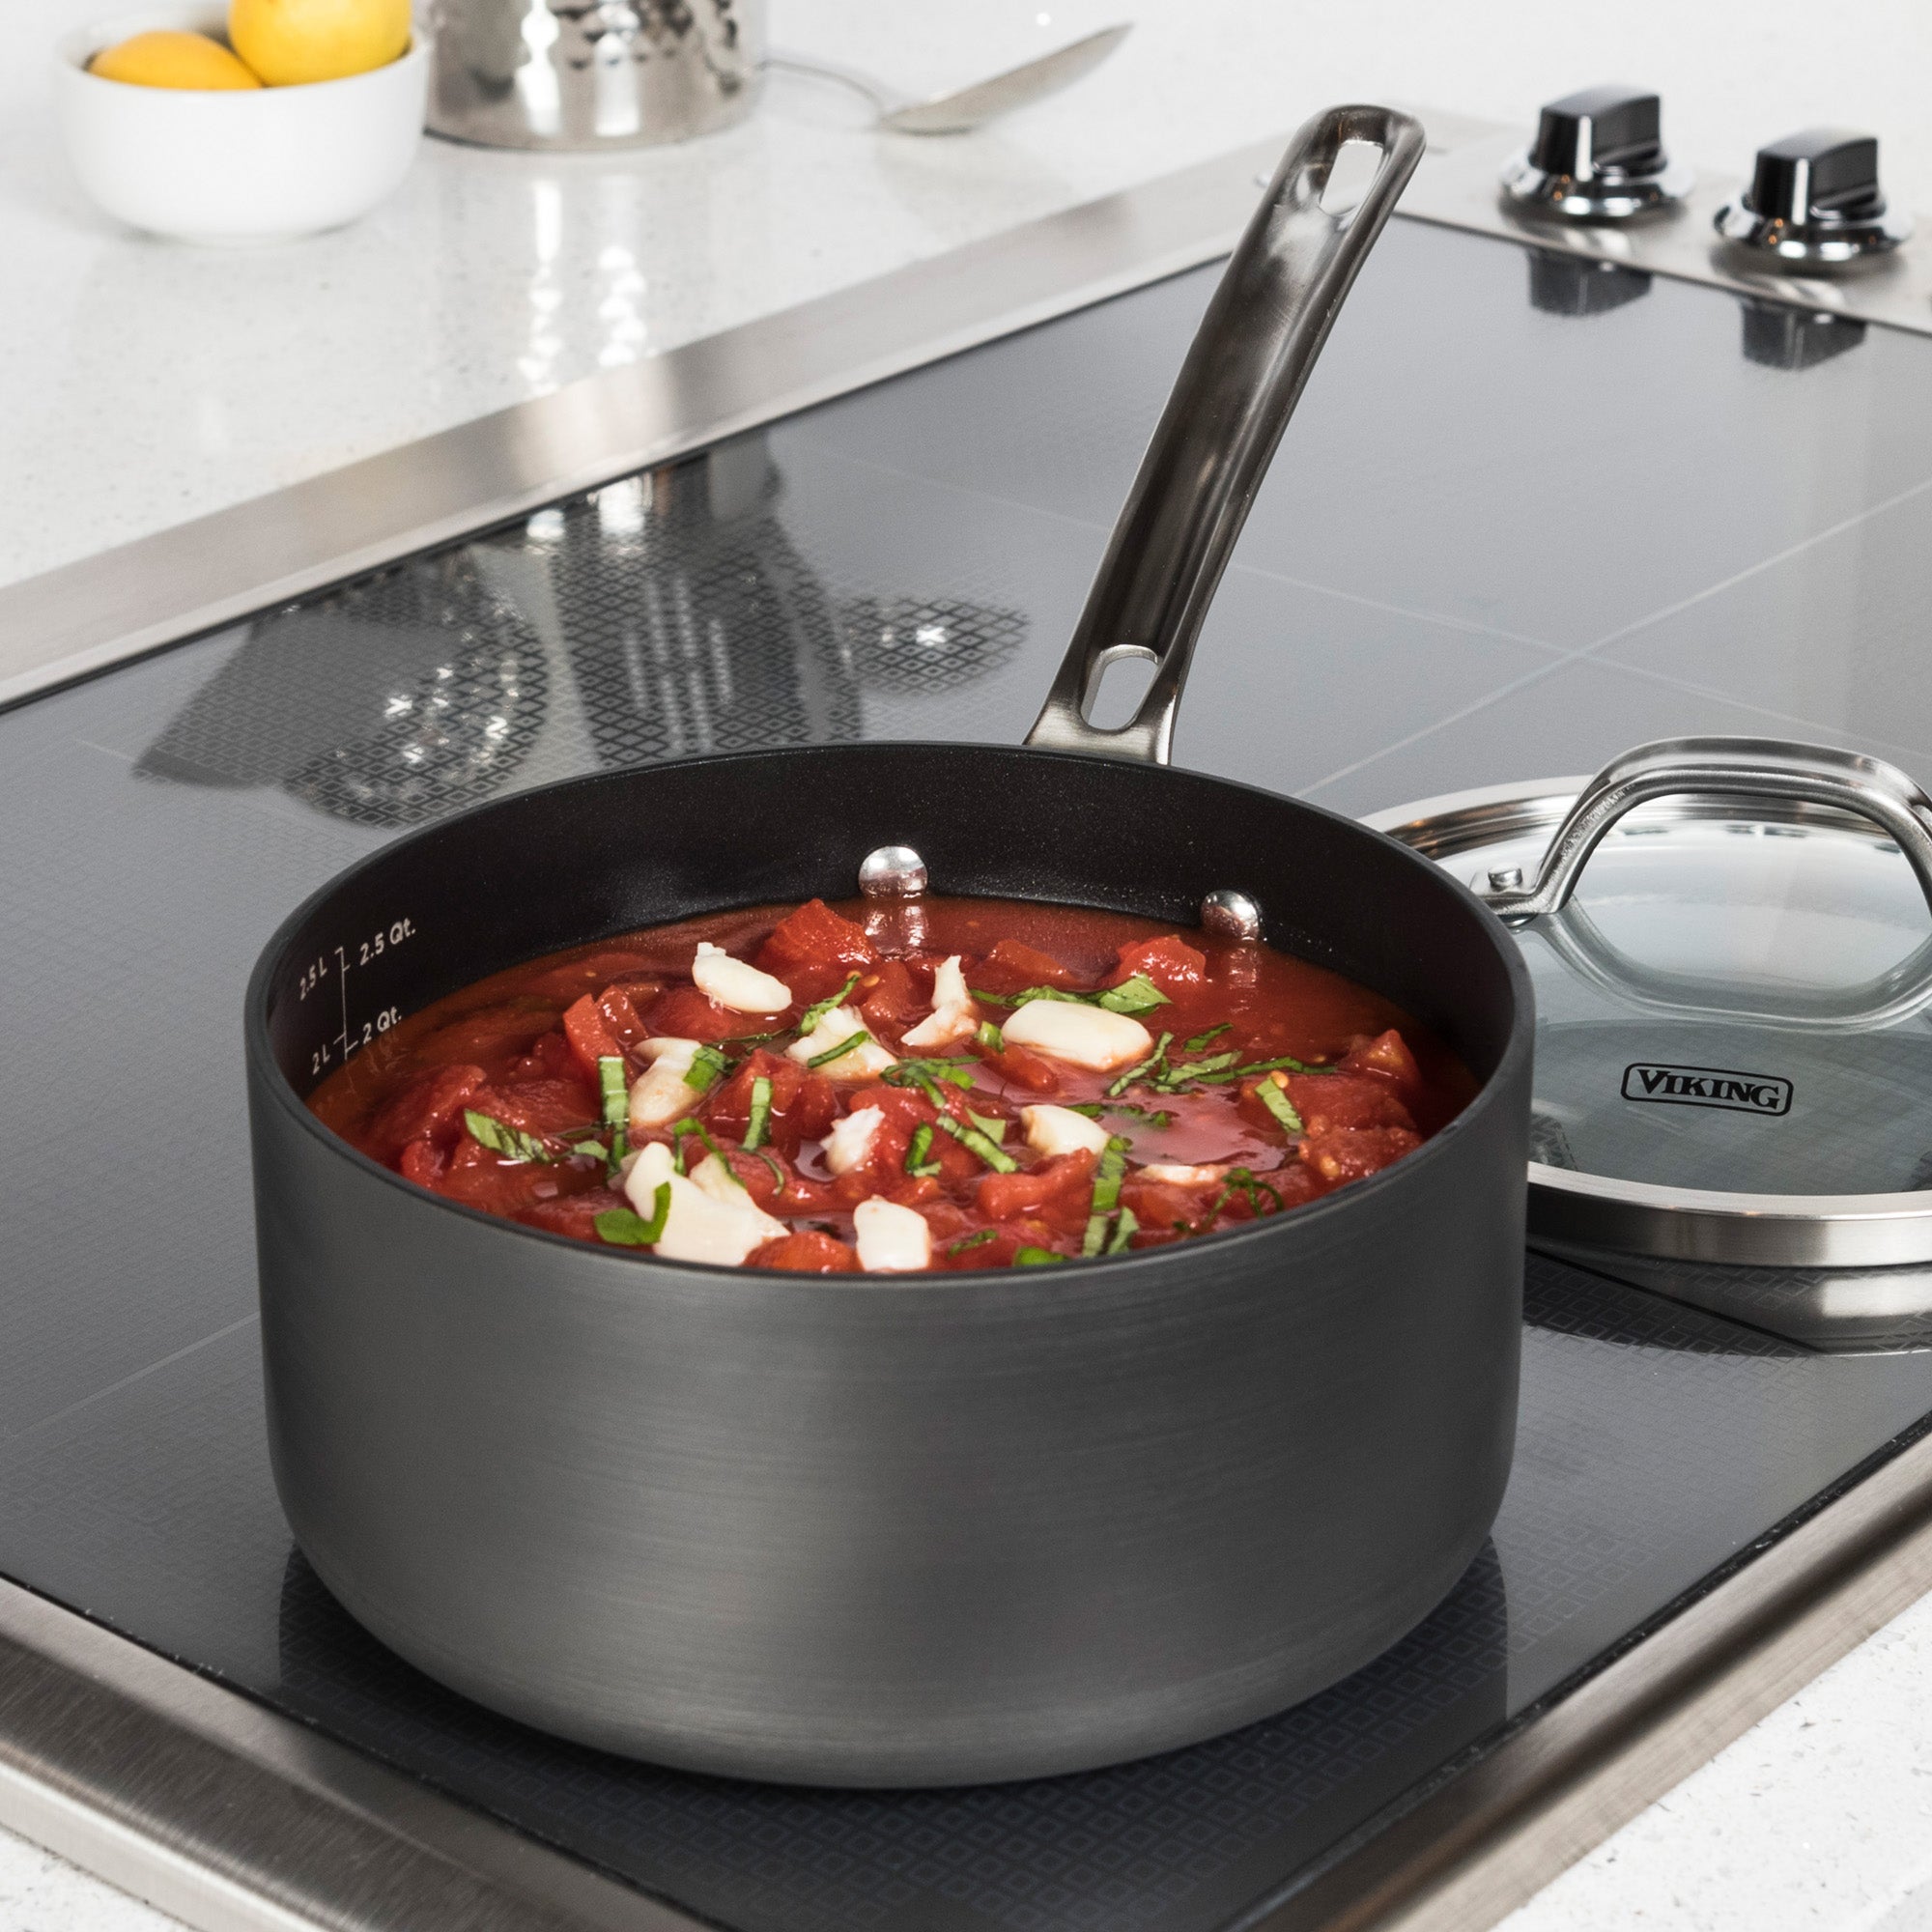 Select by Calphalon Hard-Anodized Nonstick 2.5-Quart Sauce Pan with Lid